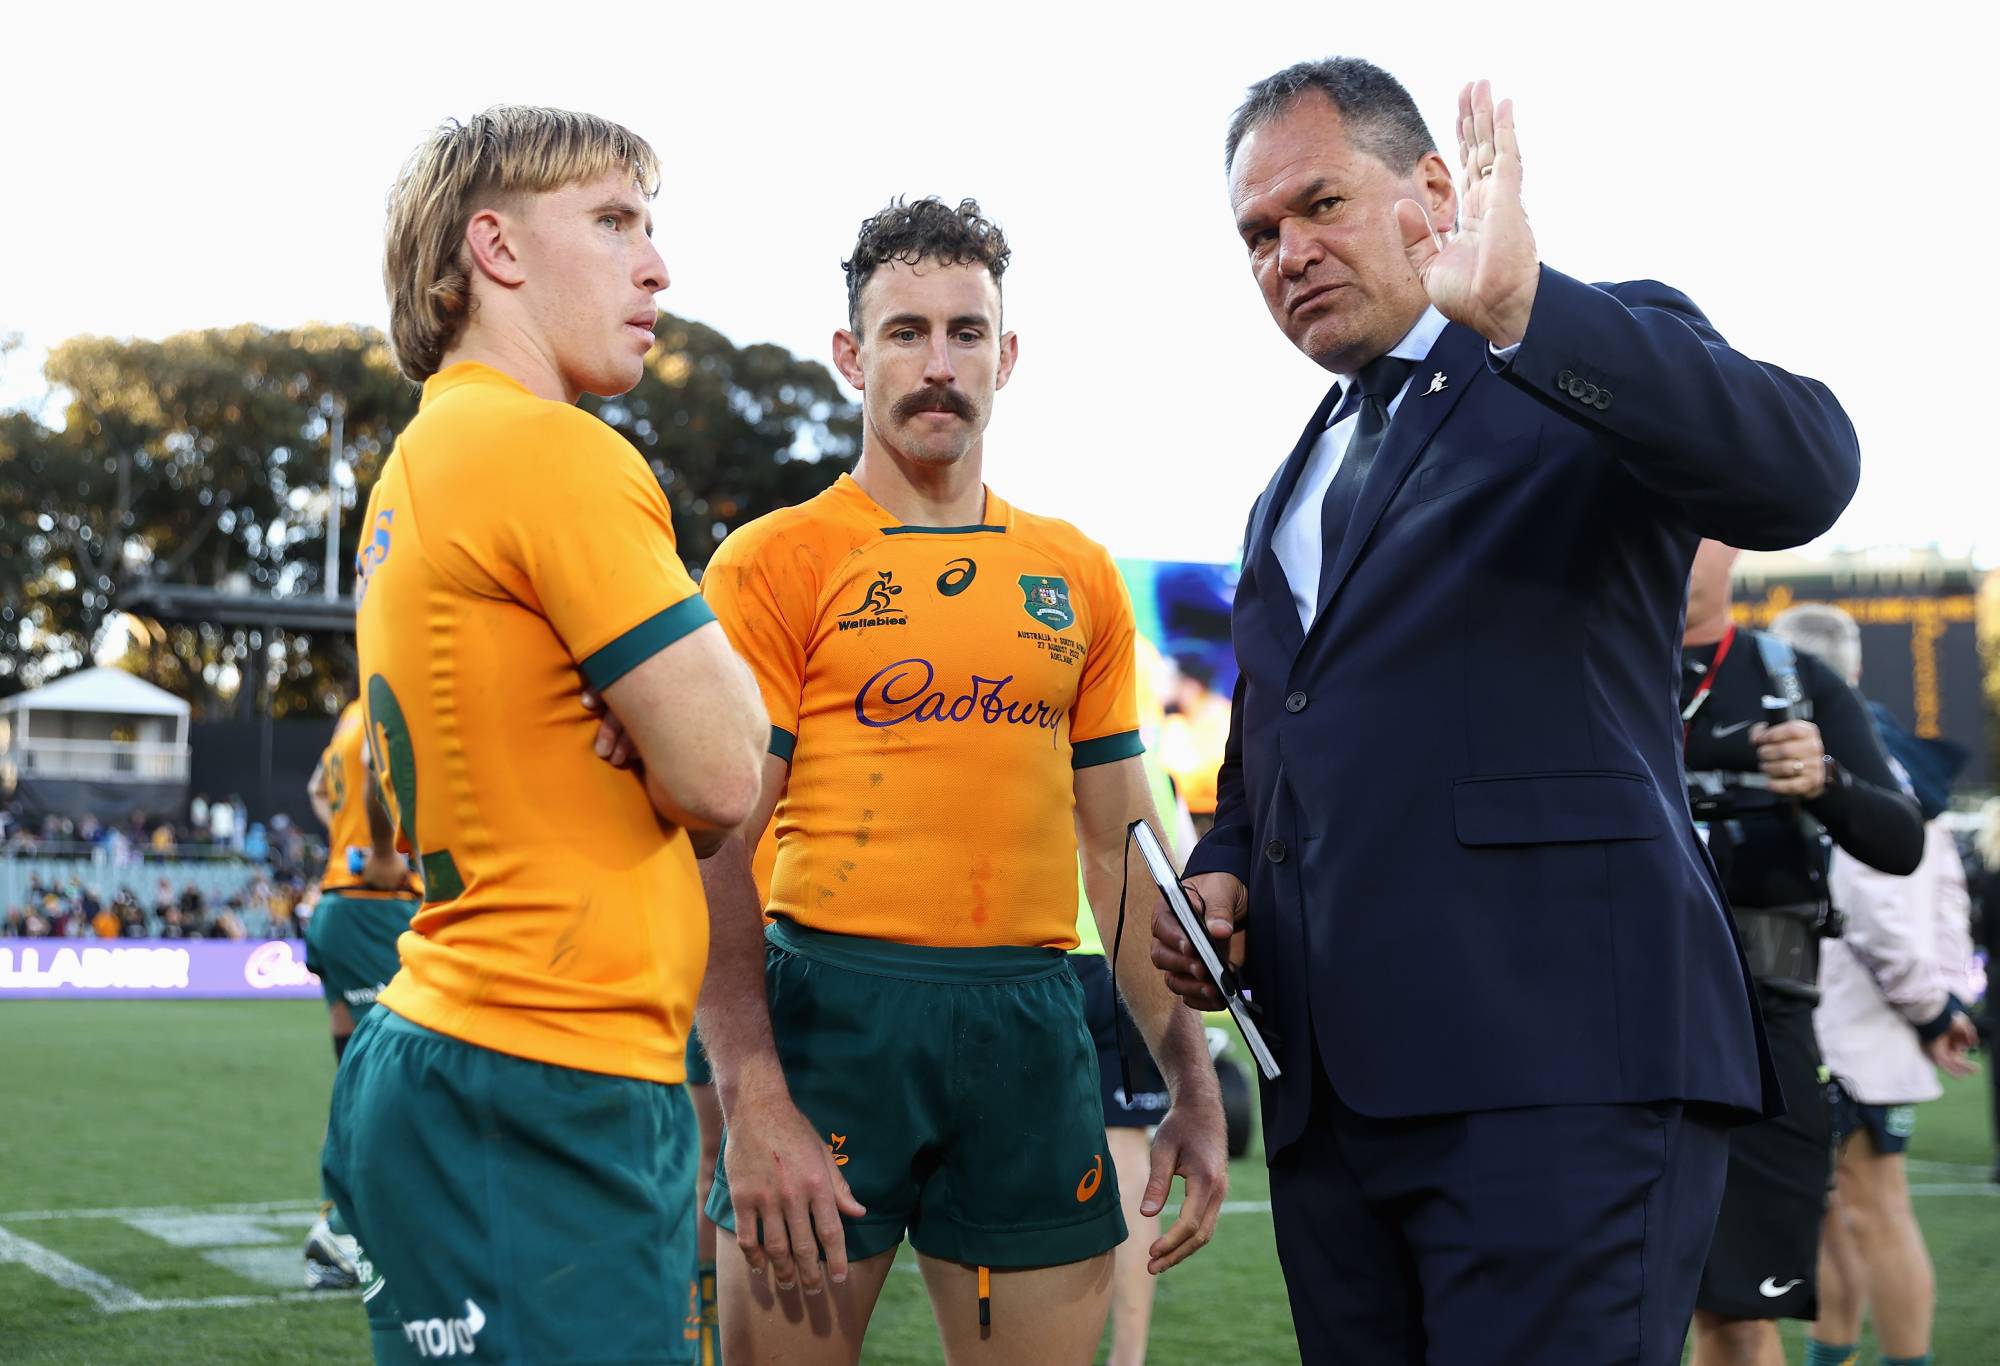 Wallabies head coach Dave Rennie talks to Tate McDermott of the Wallabies and Nic White of the Wallabies after winning The Rugby Championship match between the Australian Wallabies and the South African Springboks at Adelaide Oval on August 27, 2022 in Adelaide, Australia. (Photo by Cameron Spencer/Getty Images)